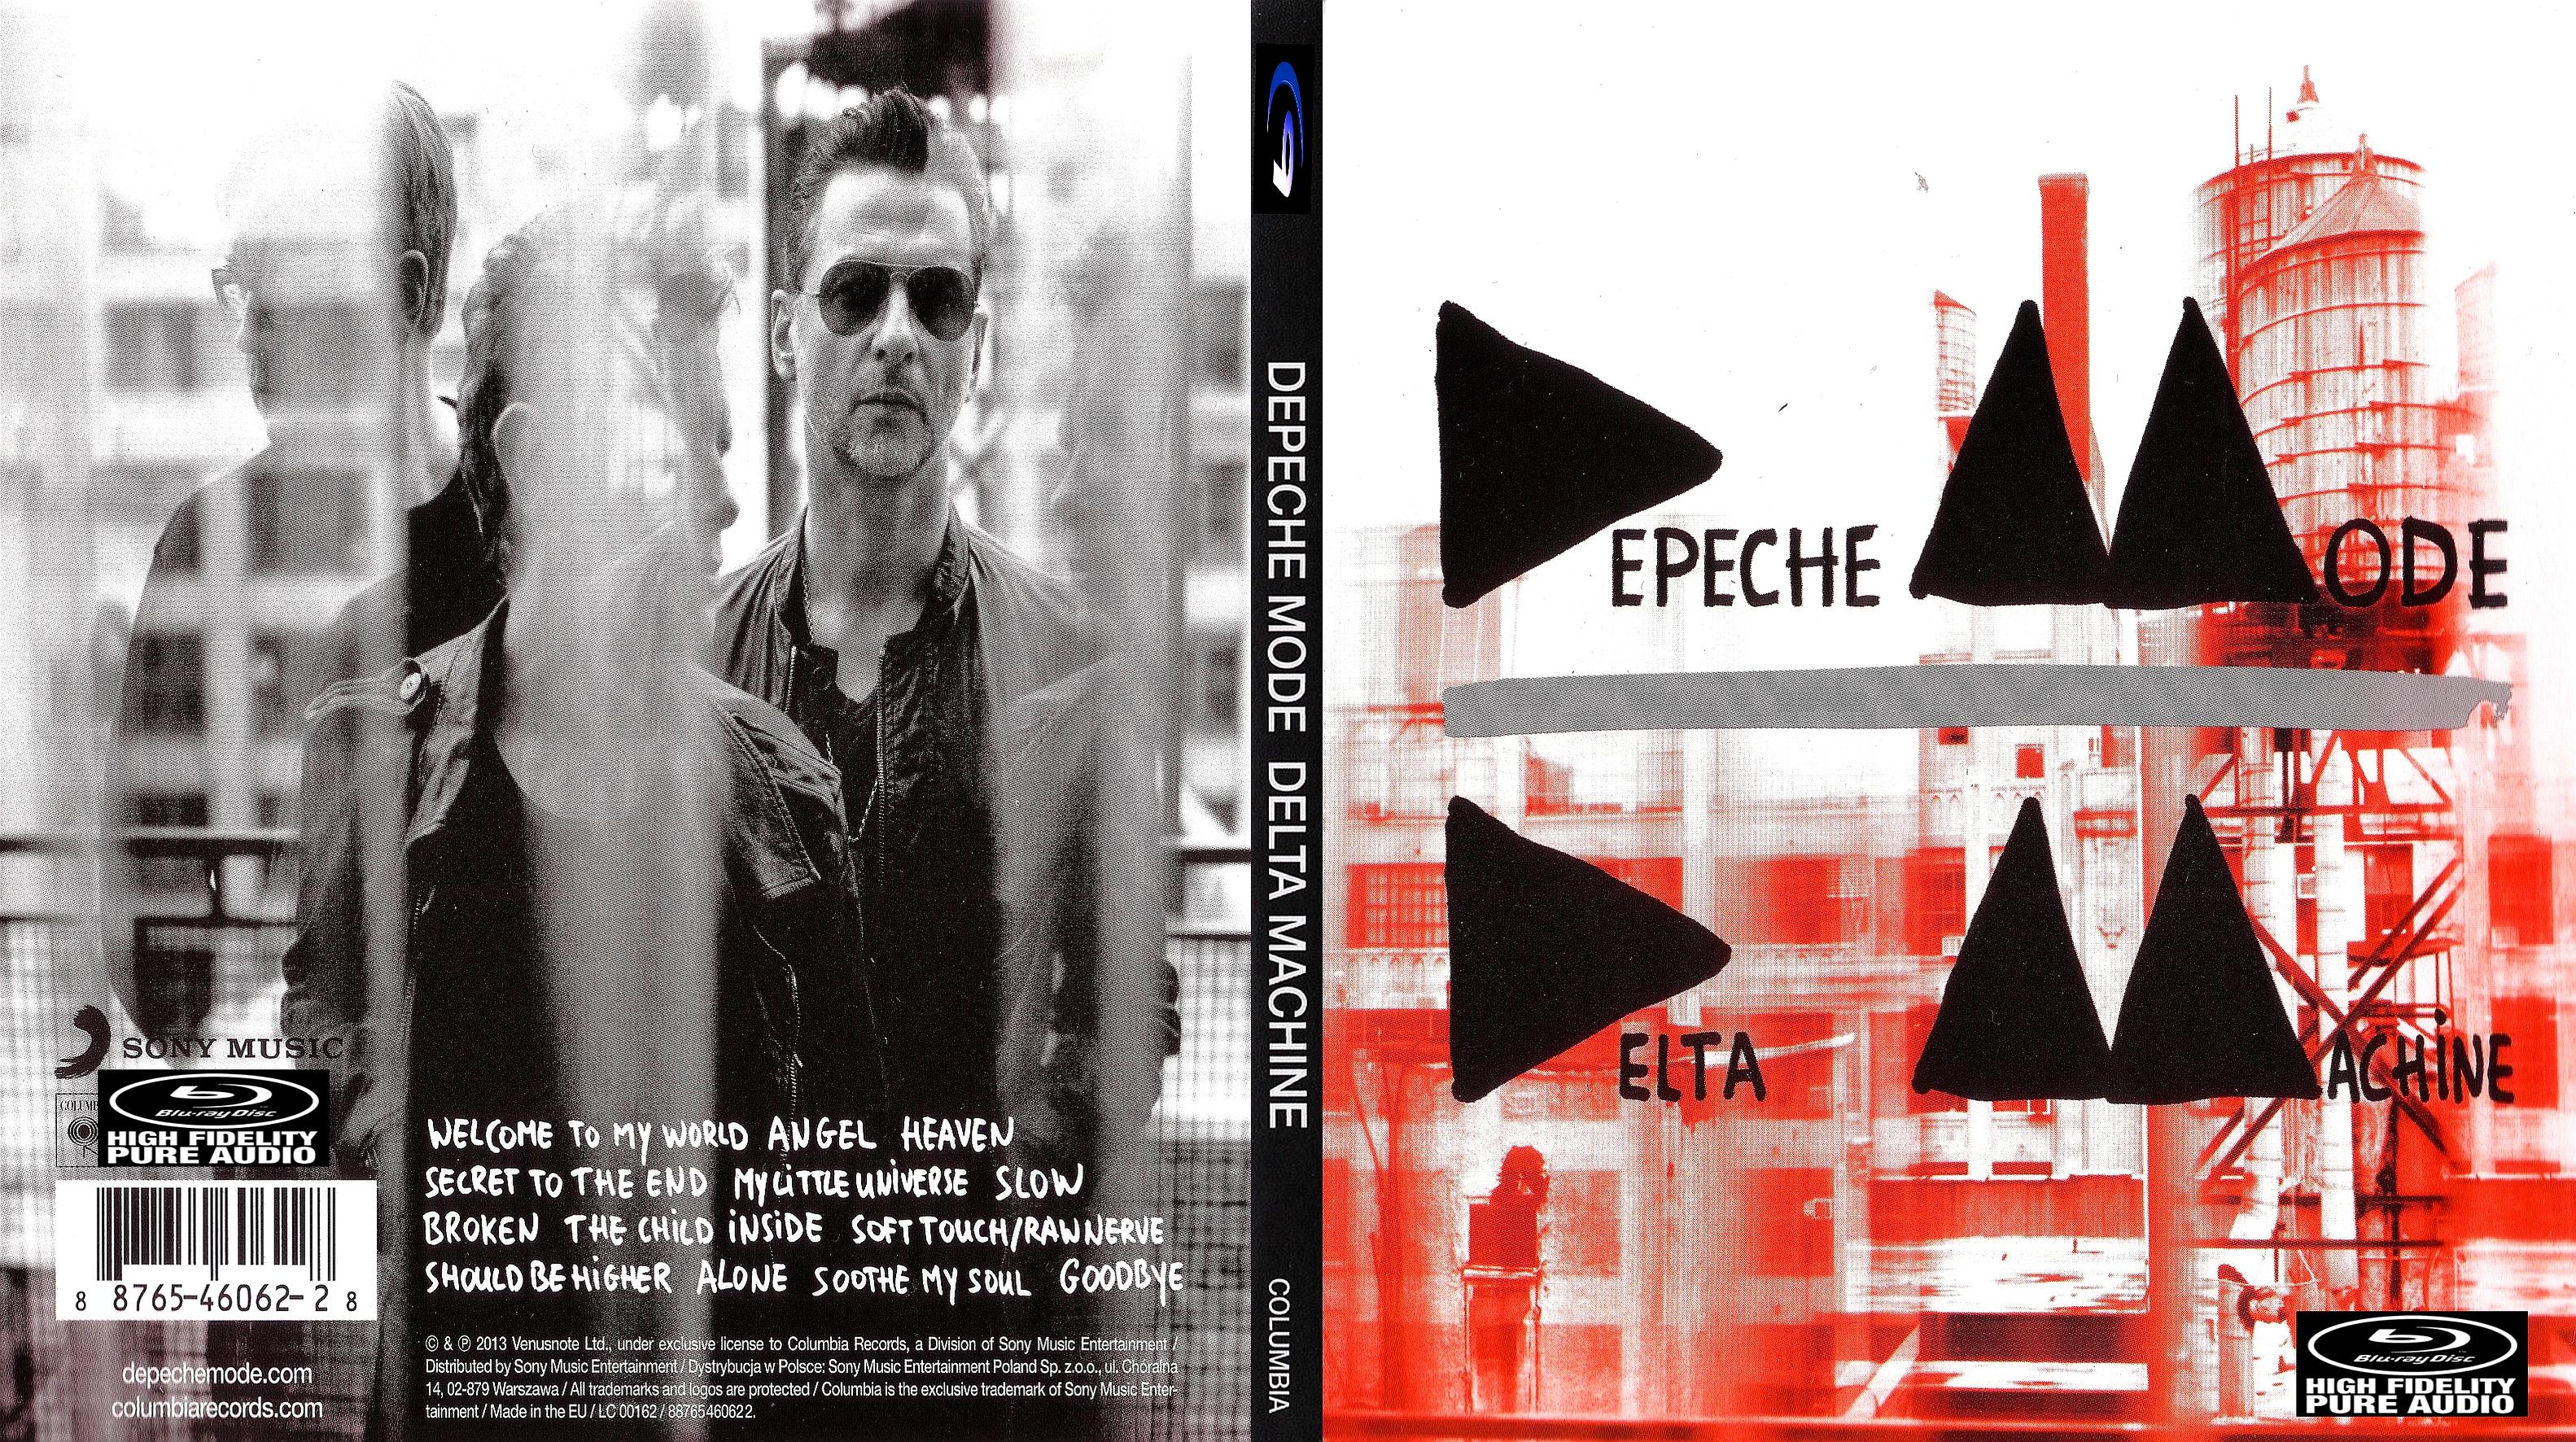 Depeche Mode Documentary Series: Speak and Spell to Delta Machine 1980-2013  6 DVD Set (nearly 12 HOURS LONG) – Music Video Resource